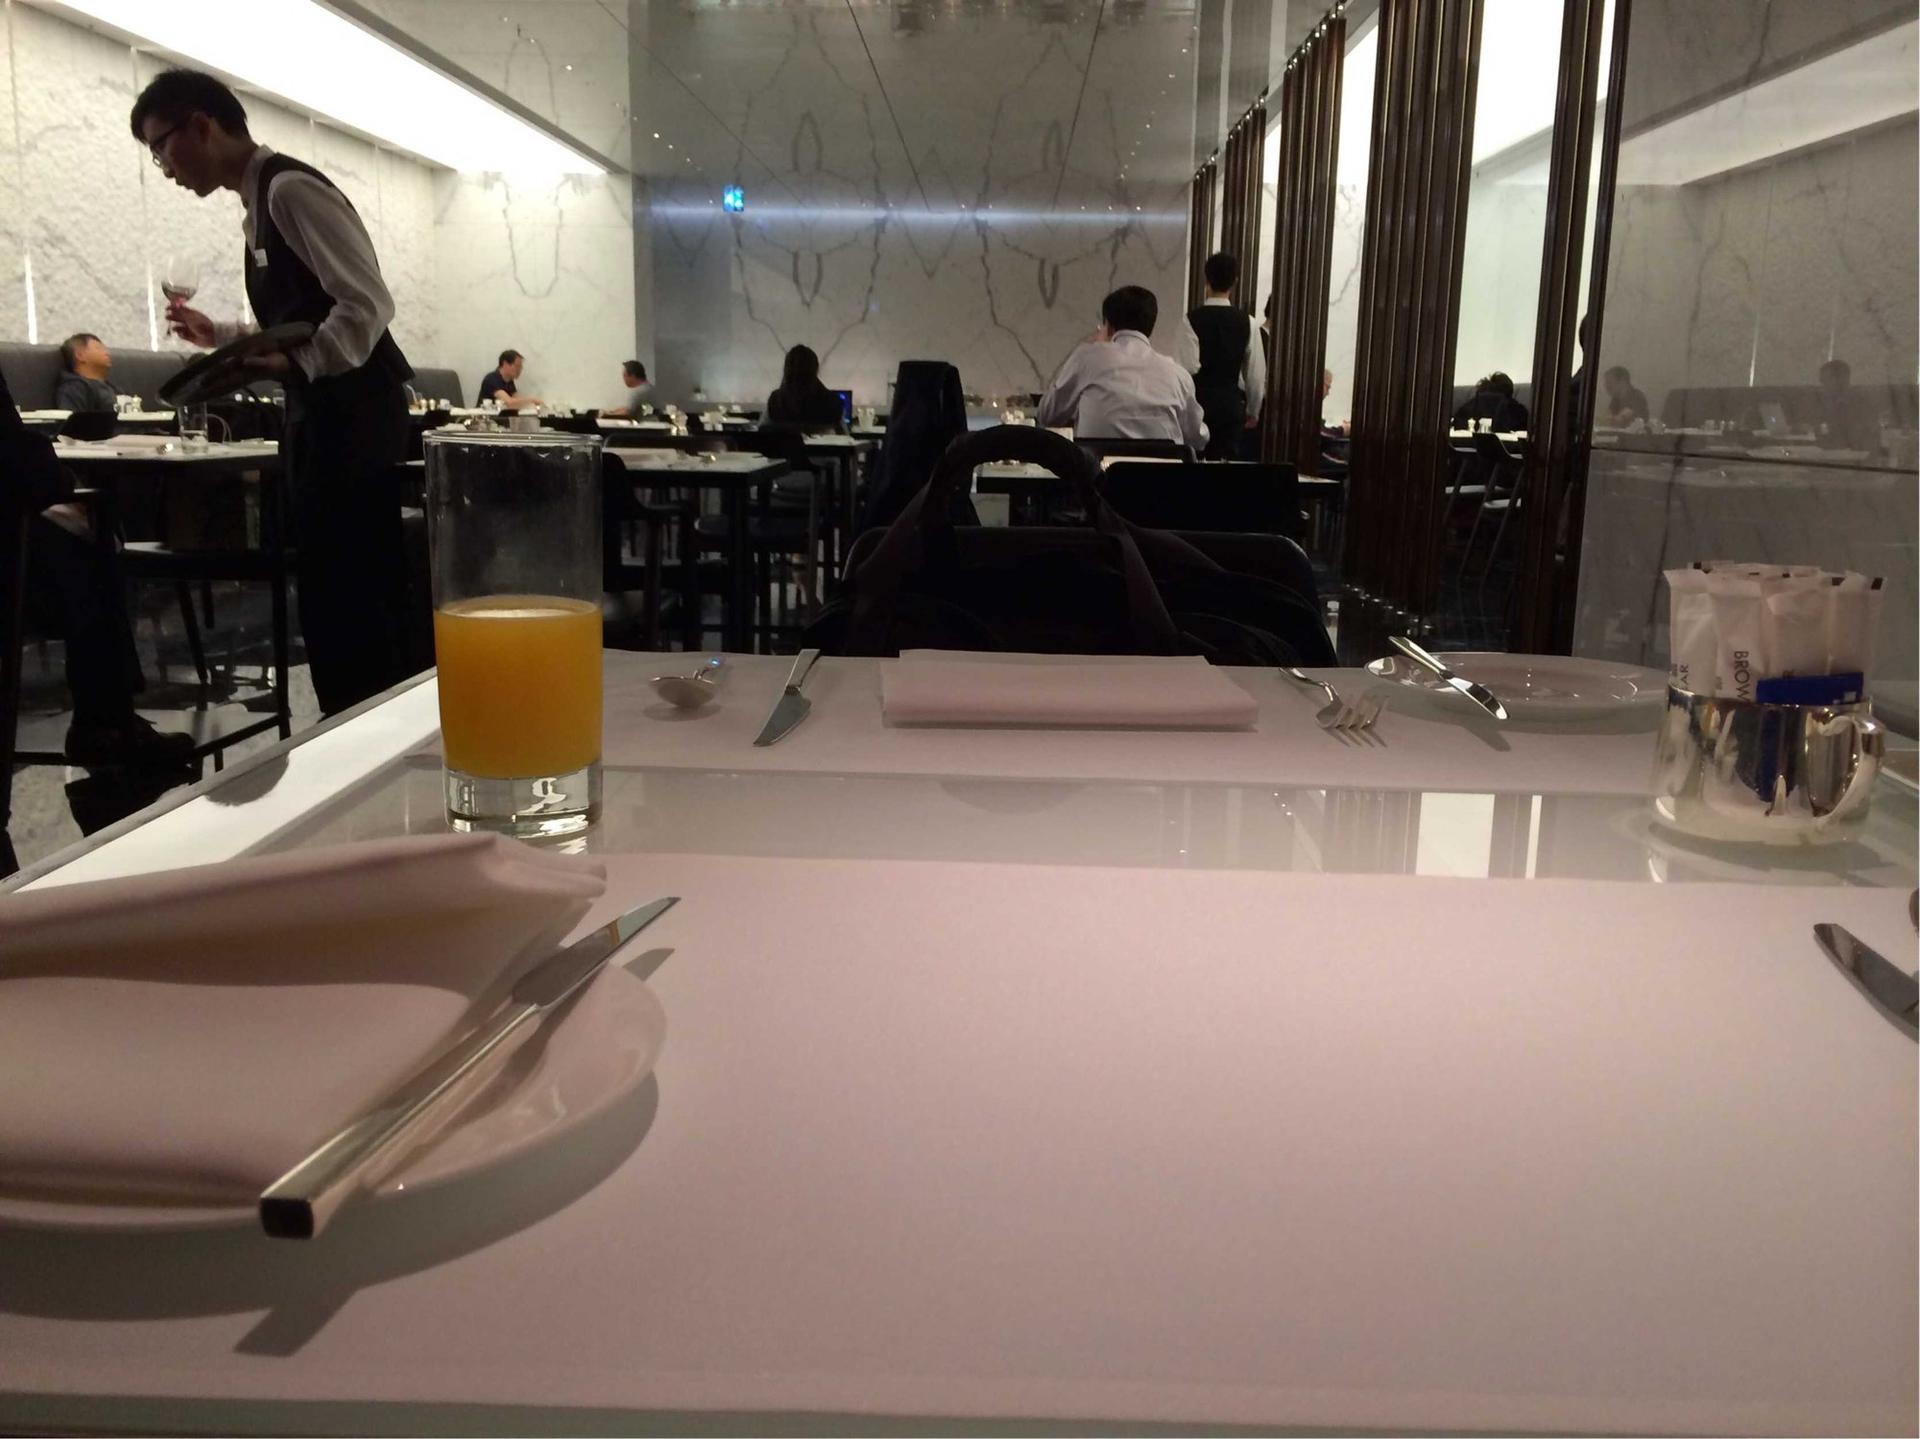 Cathay Pacific The Wing Business Class Lounge image 17 of 55